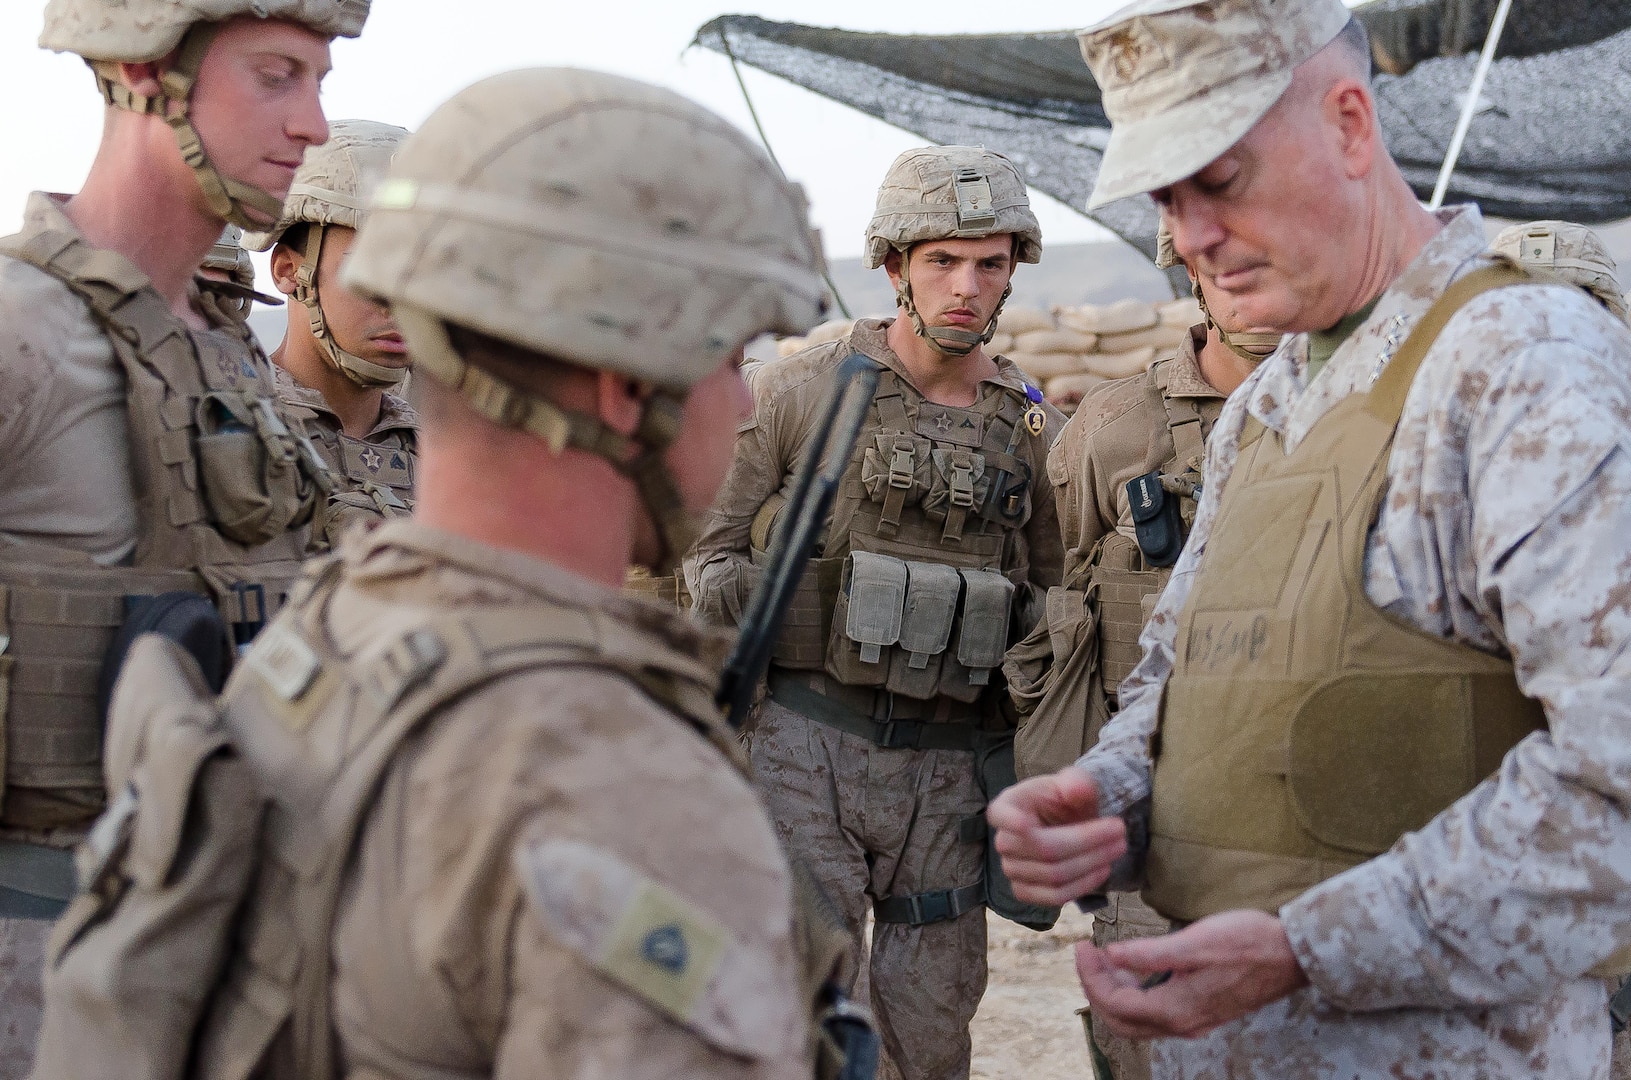 Chairman of the Joint Chiefs of Staff Gen. Joseph Dunford studies a unit coin presented to him by the U.S. Marines of Battery E, 26th Marine Expeditionary Unit, after an awards ceremony during which he presented four Marines the Purple Heart at the Kara Soar Base, Makhmur, Iraq, April 22, 2016. The Purple Hearts were awarded for wounds the Marines received during a rocket attack near their position March 19. Dunford was also presented with a primer from a mission they shot. (U.S. Army Photo by Staff Sgt. Peter J. Berardi)